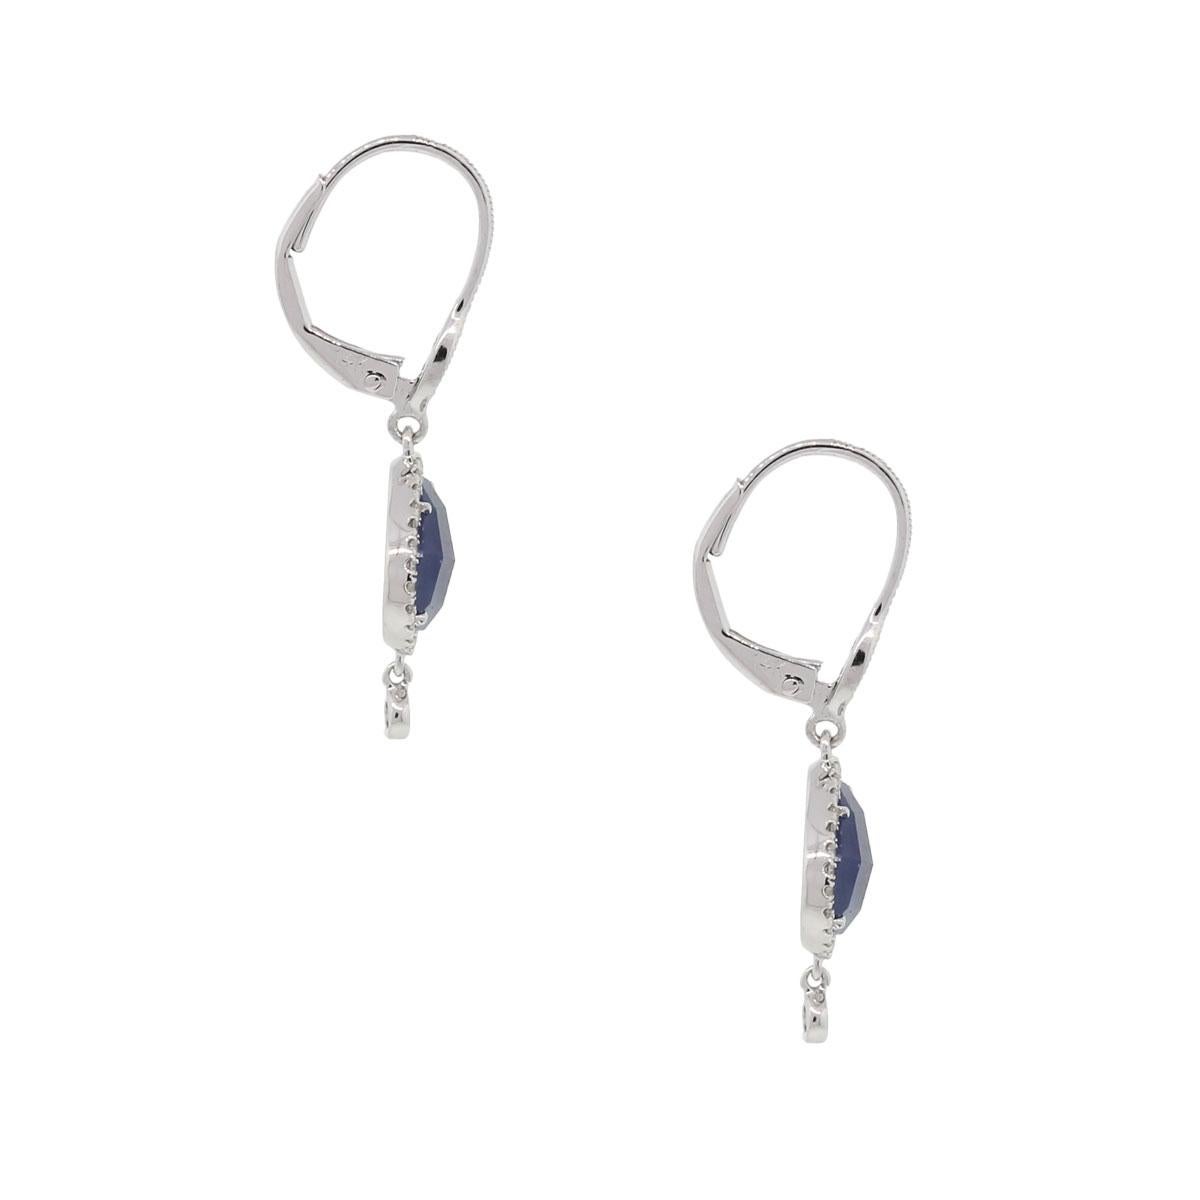 Designer: Meira T
Style: Sapphire and Diamond drop earrings
Material: 14k White Gold
Diamond Details: Approximately 0.26ctw of round brilliant diamonds. Diamonds are G/H in color and SI in clarity
Gemstone Details: Approximately 4.01ctw of